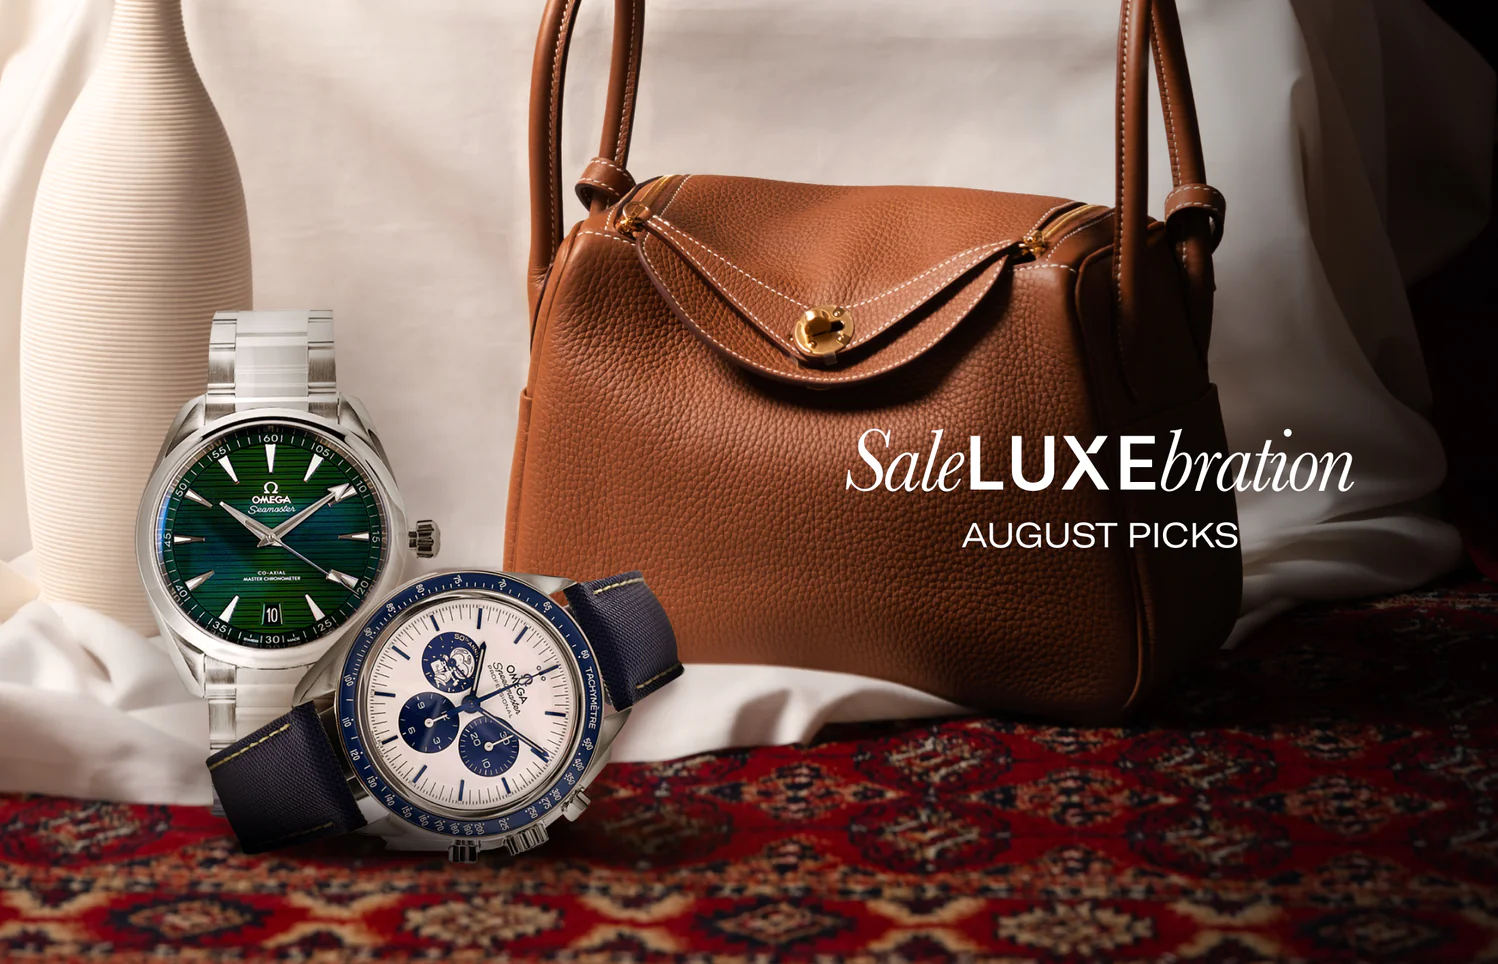 SaleLUXEbration August Picks: Exclusive Deals On Omega And Hermès